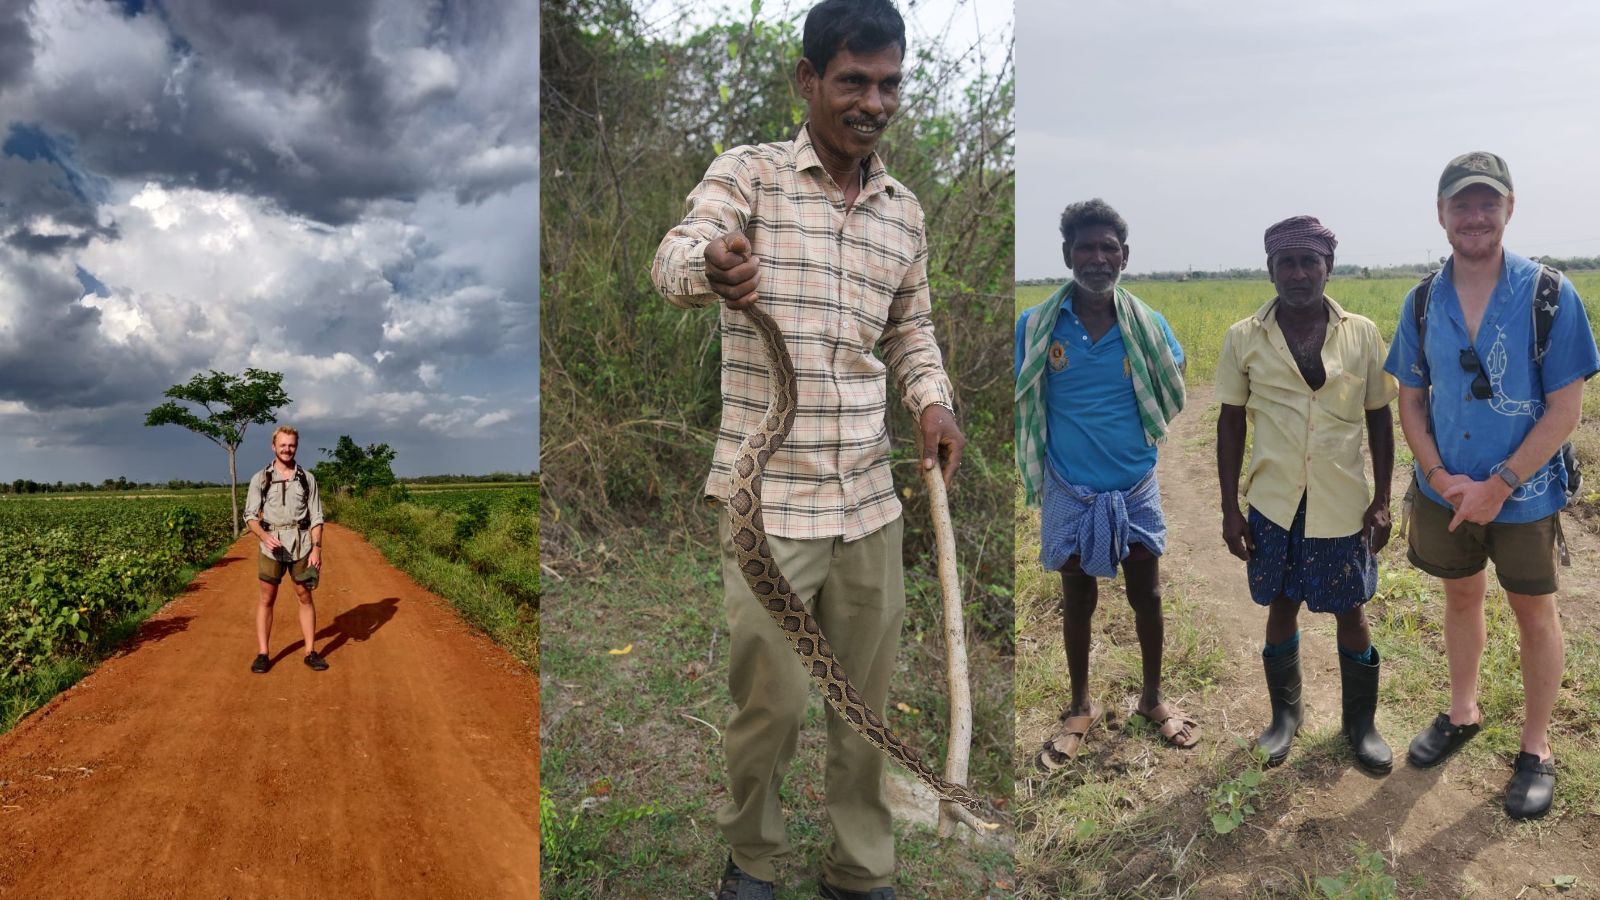 Three images of Harrison Carter in India, and of local people dealing with snakes